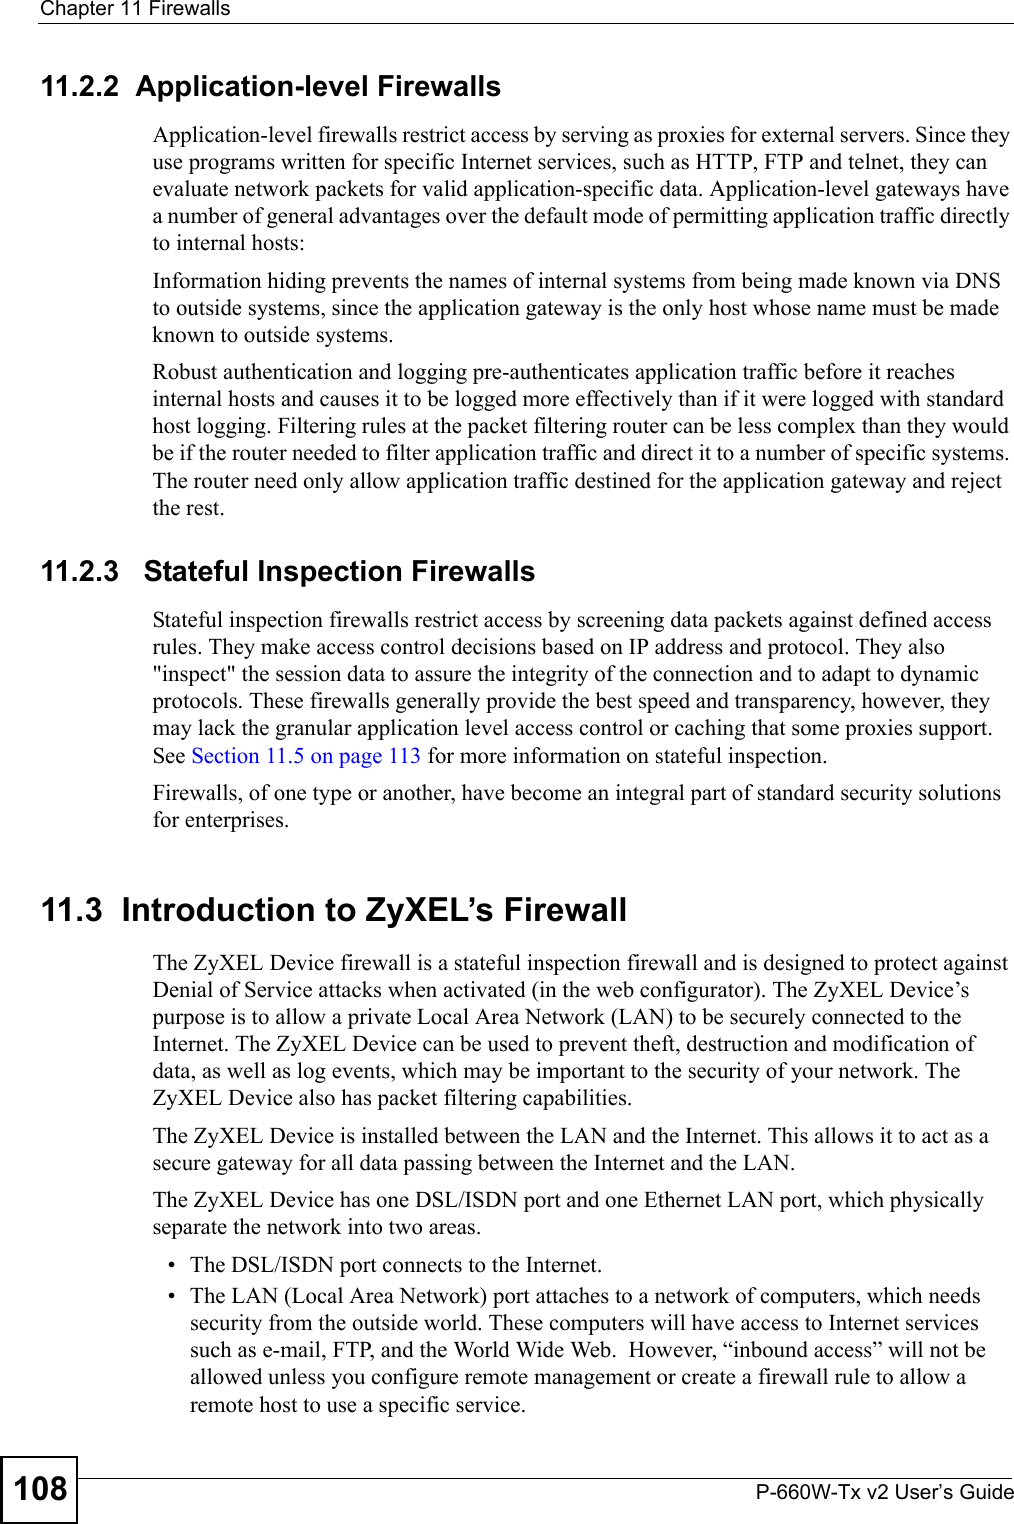 Chapter 11 FirewallsP-660W-Tx v2 User’s Guide10811.2.2  Application-level FirewallsApplication-level firewalls restrict access by serving as proxies for external servers. Since they use programs written for specific Internet services, such as HTTP, FTP and telnet, they can evaluate network packets for valid application-specific data. Application-level gateways have a number of general advantages over the default mode of permitting application traffic directly to internal hosts:Information hiding prevents the names of internal systems from being made known via DNS to outside systems, since the application gateway is the only host whose name must be made known to outside systems.Robust authentication and logging pre-authenticates application traffic before it reaches internal hosts and causes it to be logged more effectively than if it were logged with standard host logging. Filtering rules at the packet filtering router can be less complex than they would be if the router needed to filter application traffic and direct it to a number of specific systems. The router need only allow application traffic destined for the application gateway and reject the rest.11.2.3   Stateful Inspection Firewalls Stateful inspection firewalls restrict access by screening data packets against defined access rules. They make access control decisions based on IP address and protocol. They also &quot;inspect&quot; the session data to assure the integrity of the connection and to adapt to dynamic protocols. These firewalls generally provide the best speed and transparency, however, they may lack the granular application level access control or caching that some proxies support. See Section 11.5 on page 113 for more information on stateful inspection.Firewalls, of one type or another, have become an integral part of standard security solutions for enterprises.11.3  Introduction to ZyXEL’s FirewallThe ZyXEL Device firewall is a stateful inspection firewall and is designed to protect against Denial of Service attacks when activated (in the web configurator). The ZyXEL Device’s purpose is to allow a private Local Area Network (LAN) to be securely connected to the Internet. The ZyXEL Device can be used to prevent theft, destruction and modification of data, as well as log events, which may be important to the security of your network. The ZyXEL Device also has packet filtering capabilities.The ZyXEL Device is installed between the LAN and the Internet. This allows it to act as a secure gateway for all data passing between the Internet and the LAN.The ZyXEL Device has one DSL/ISDN port and one Ethernet LAN port, which physically separate the network into two areas.• The DSL/ISDN port connects to the Internet.• The LAN (Local Area Network) port attaches to a network of computers, which needs security from the outside world. These computers will have access to Internet services such as e-mail, FTP, and the World Wide Web.  However, “inbound access” will not be allowed unless you configure remote management or create a firewall rule to allow a remote host to use a specific service.